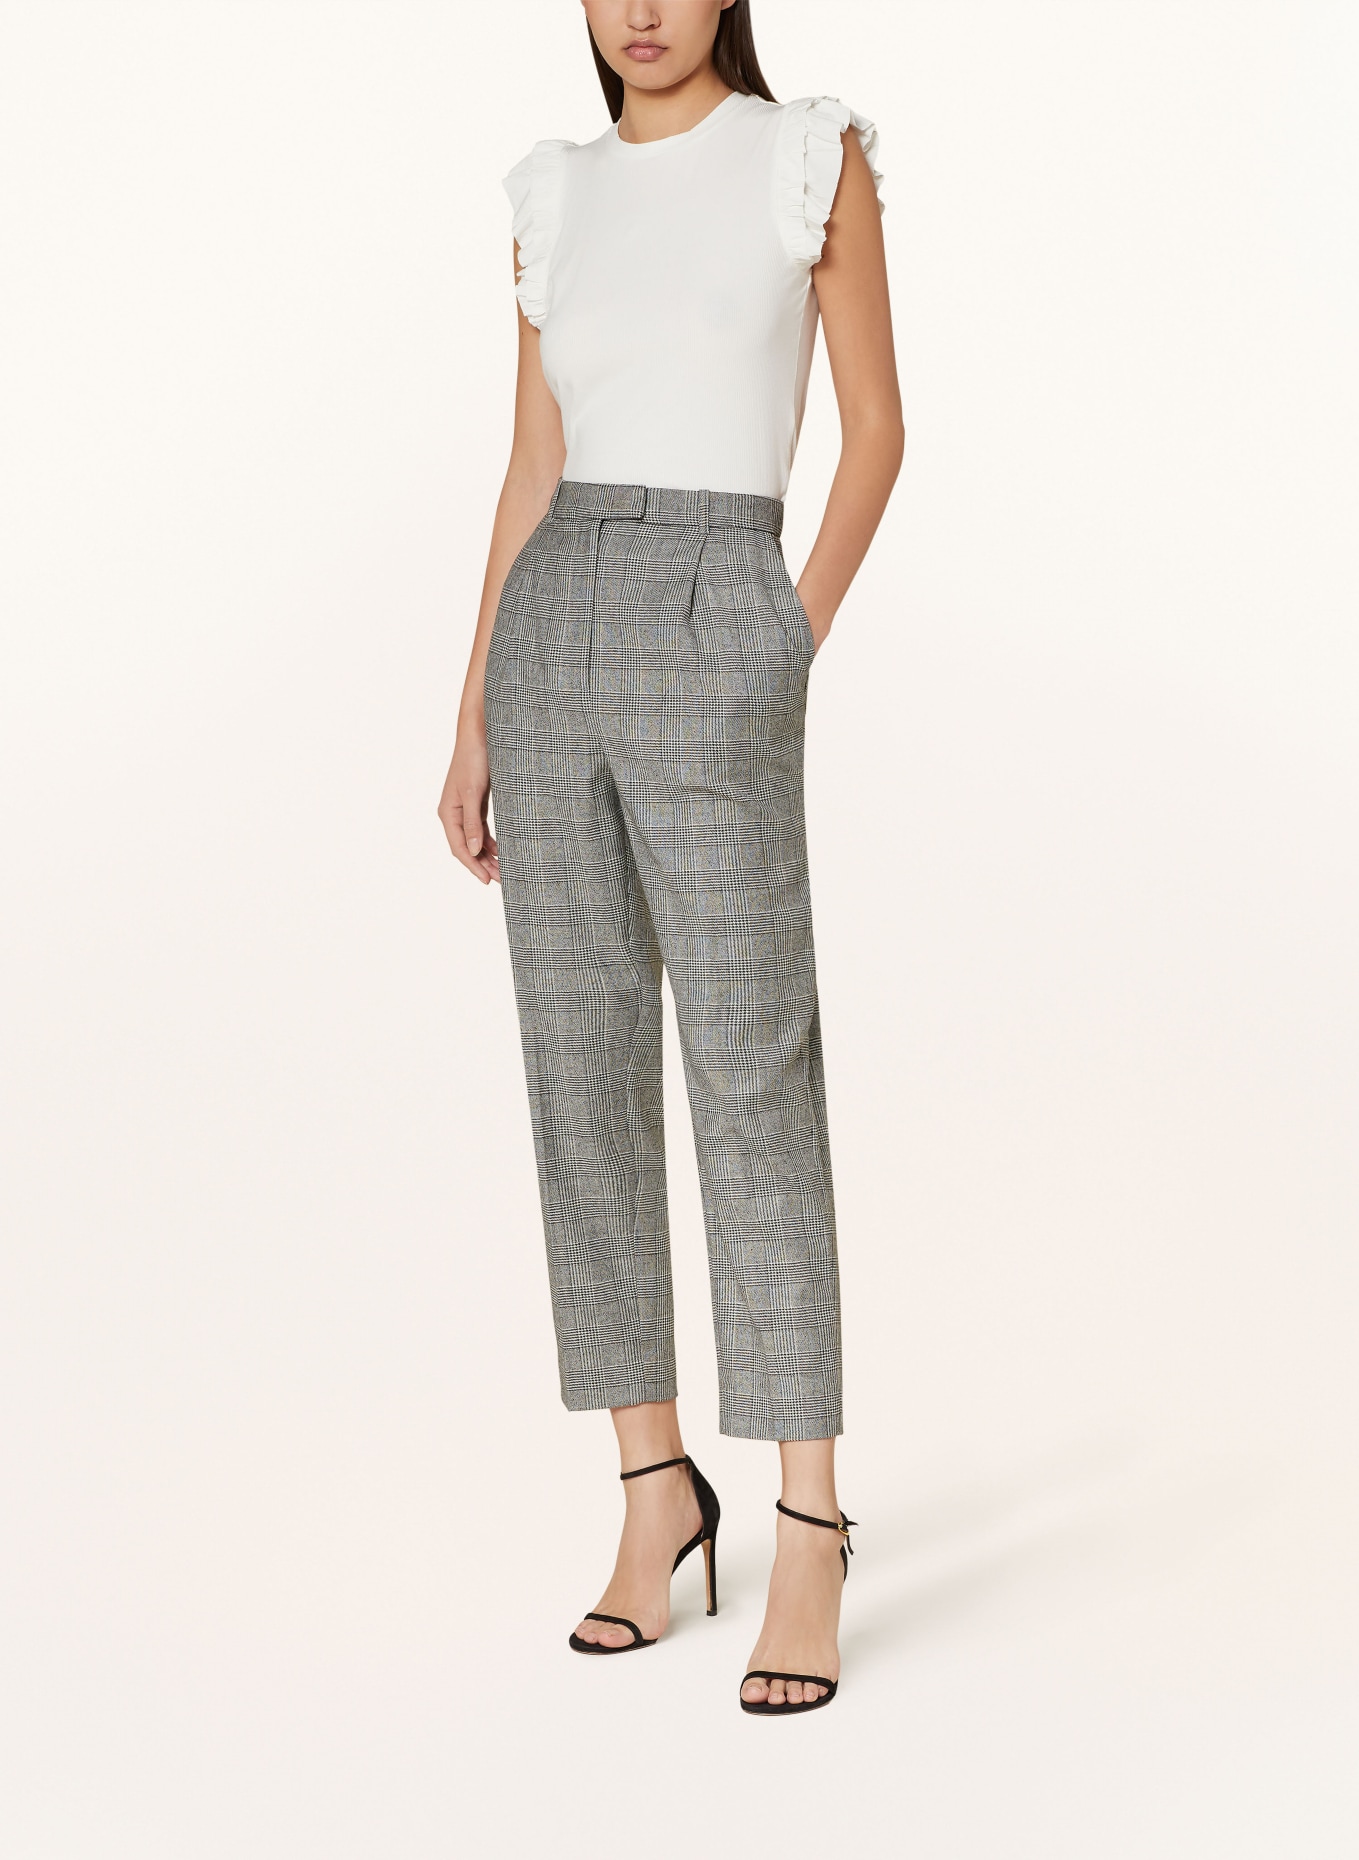 TED BAKER Trousers JOMMIAL, Color: GRAY/ LIGHT GRAY/ BLACK (Image 2)